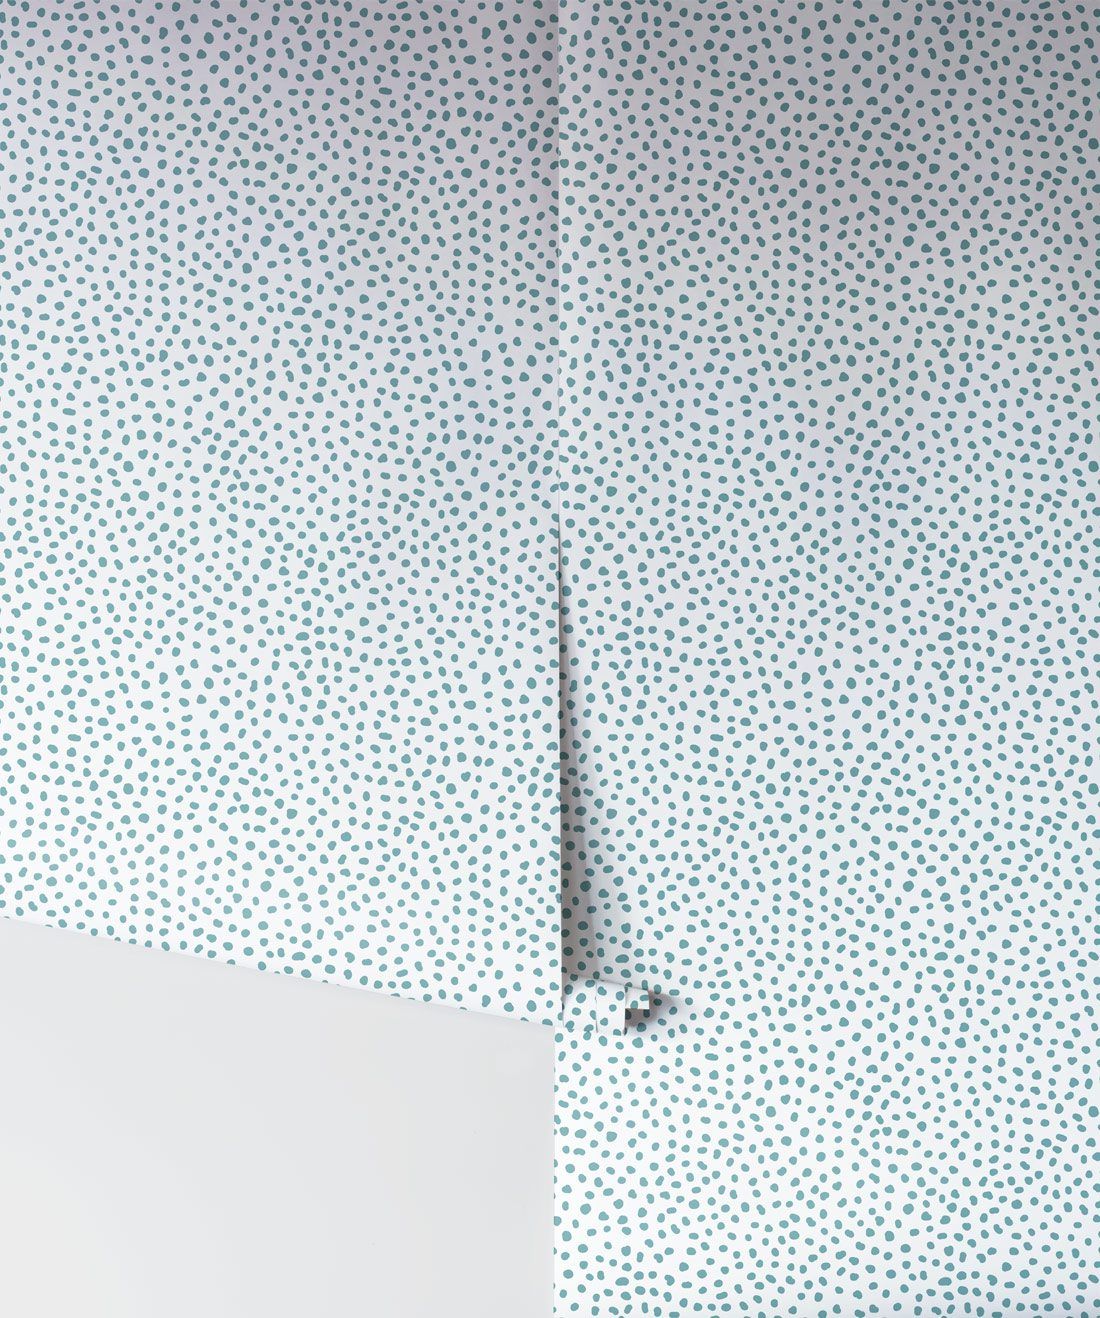 Huddy's Dots • Teal • Spotted Wallpaper • Roll